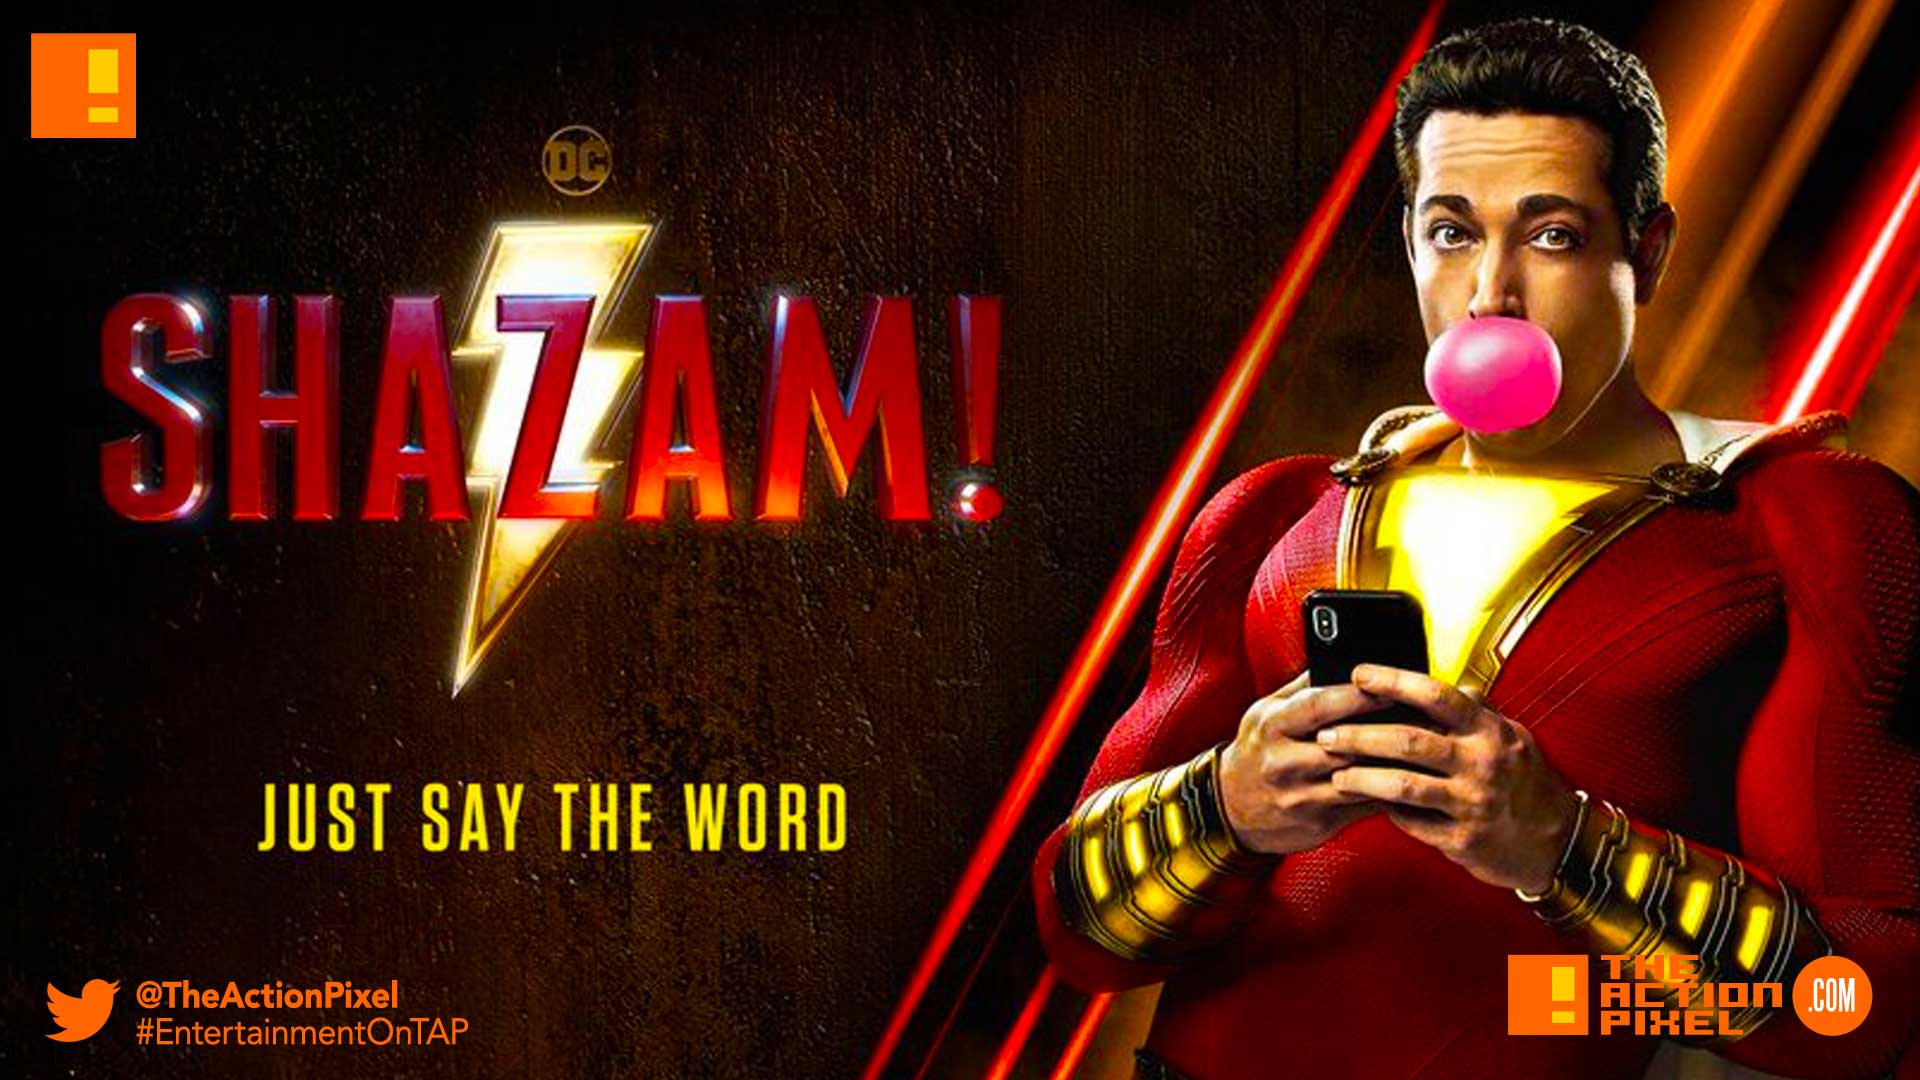 shazam!, entertainment weekly, ron cephas, mark strong, dr sivana, shazam!, shazam, captain marvel, dc comics, dc entertainment , entertainment on tap, the action pixel, shazam the wizard, wizard, casting, first look, billy batson, trailer,poster, just say the word